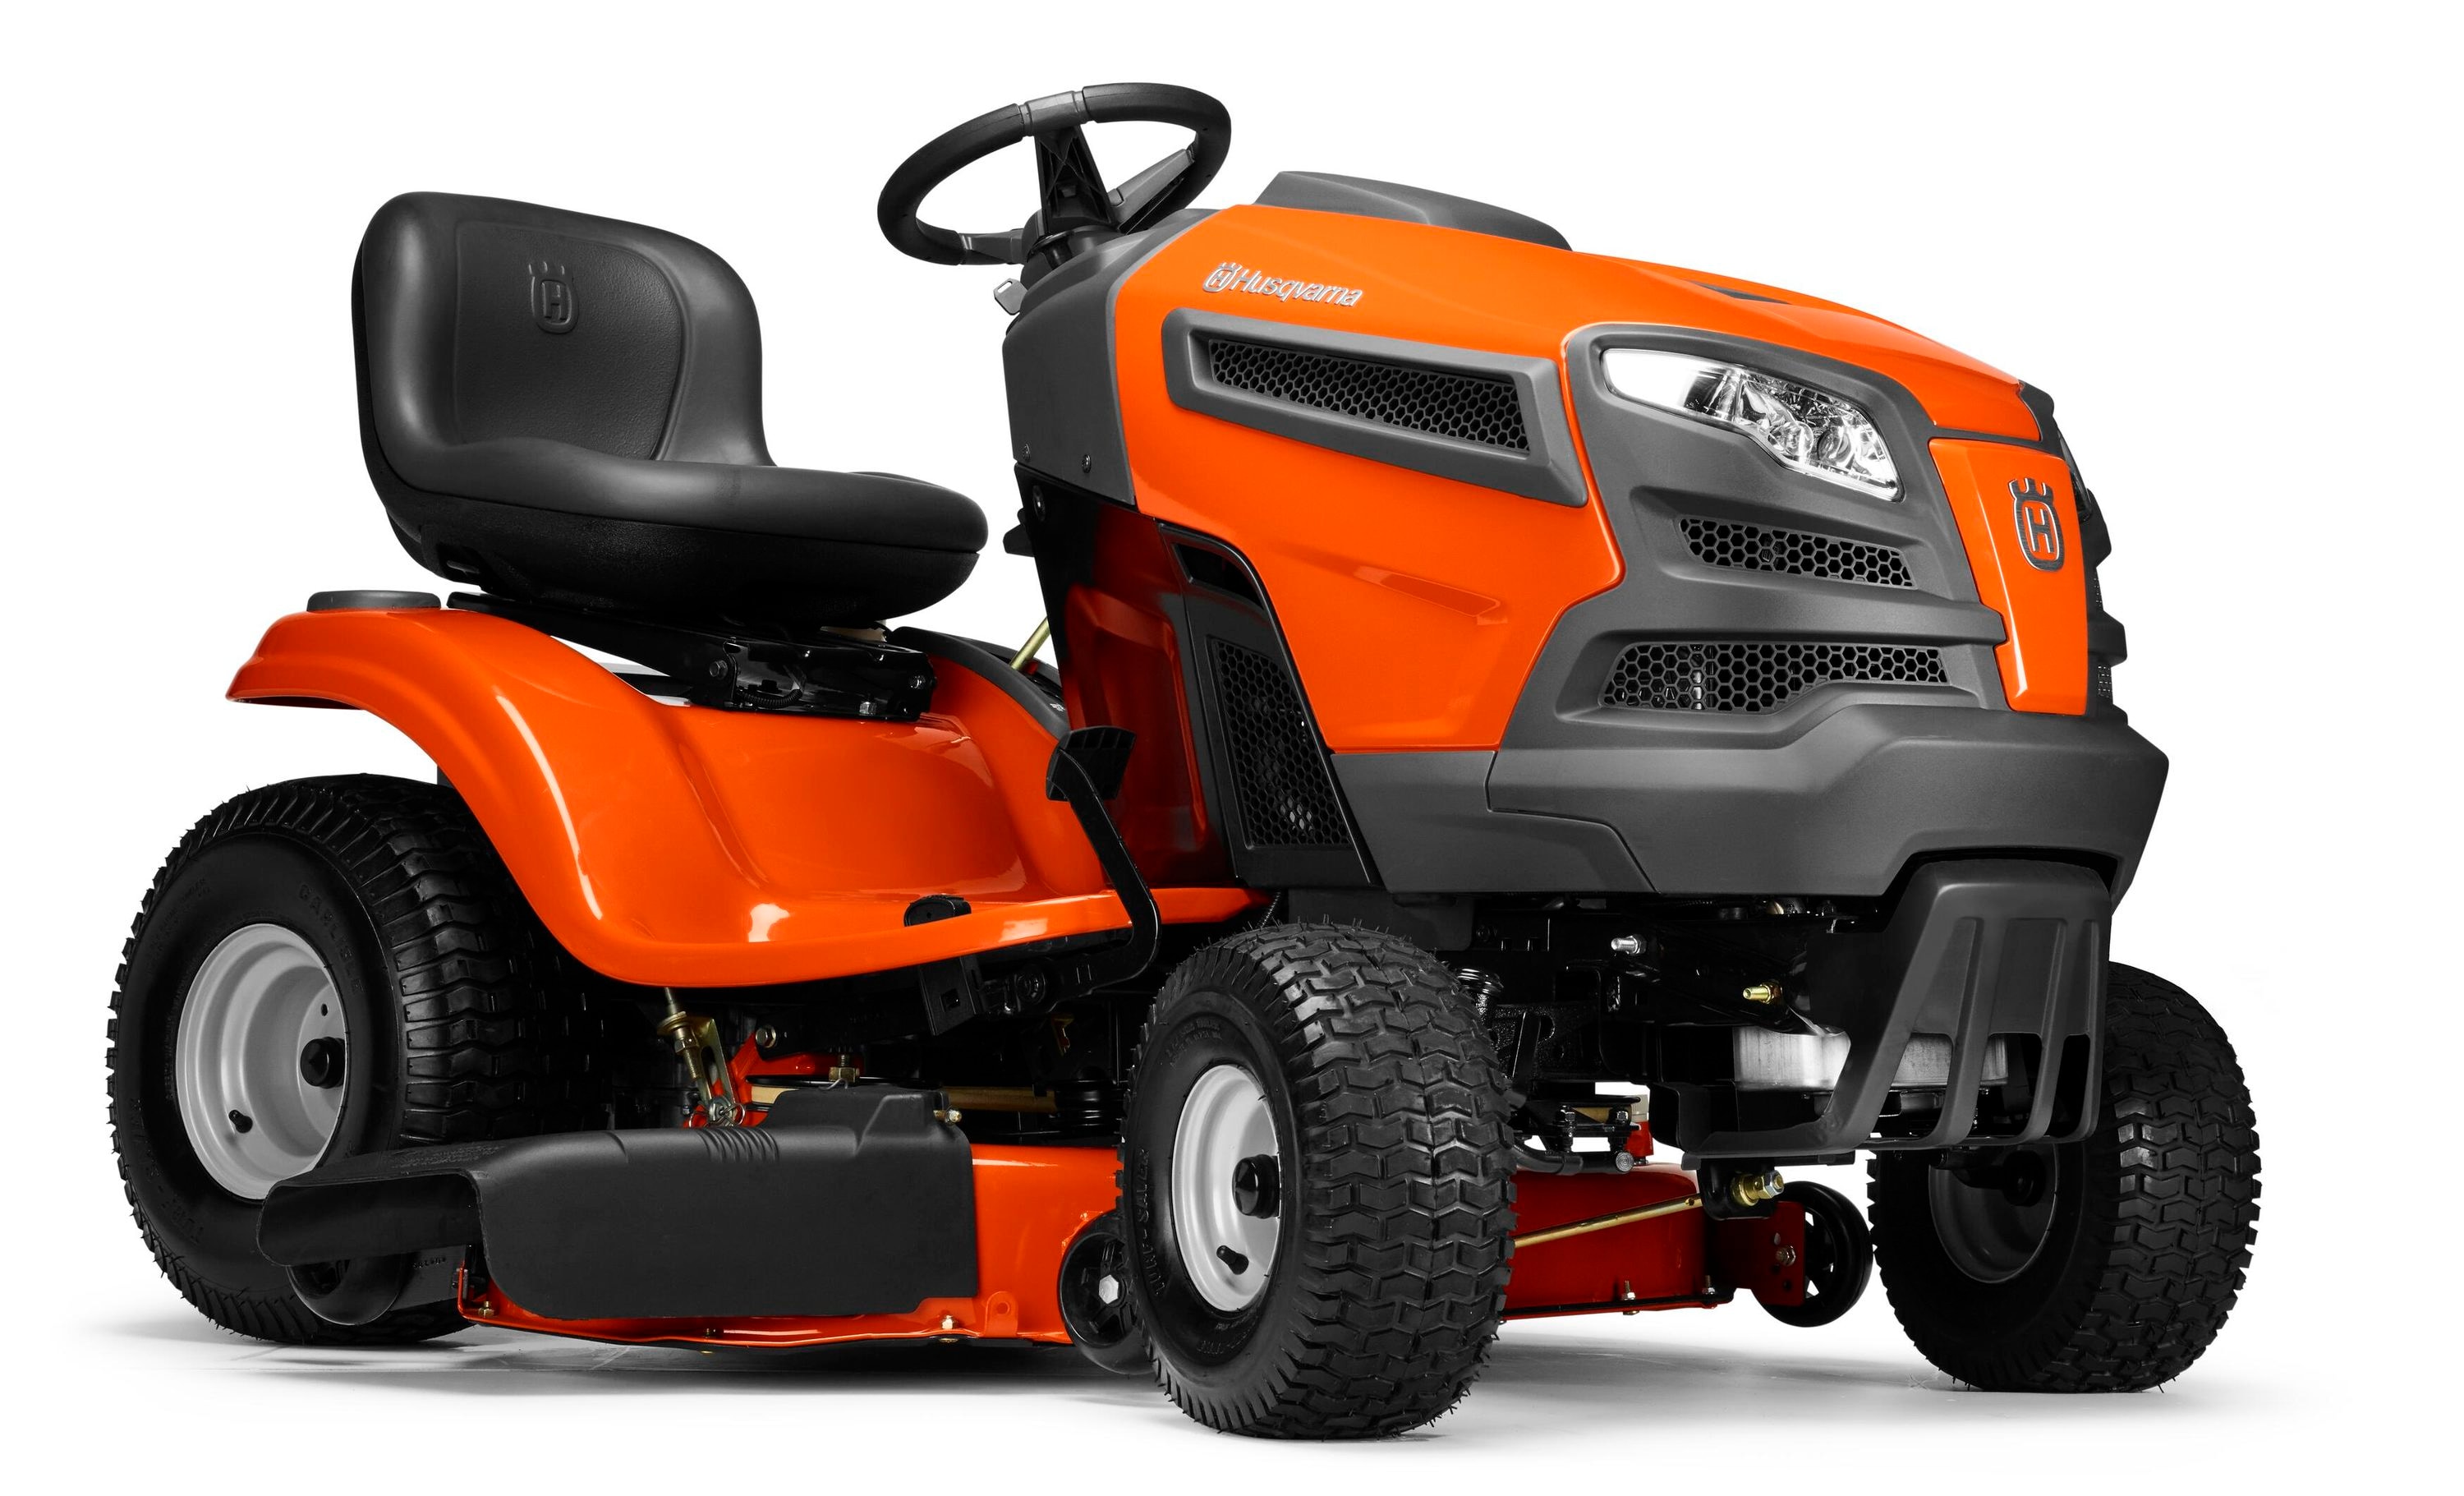 Husqvarna Lawn Mower Parts: What You Need To Know